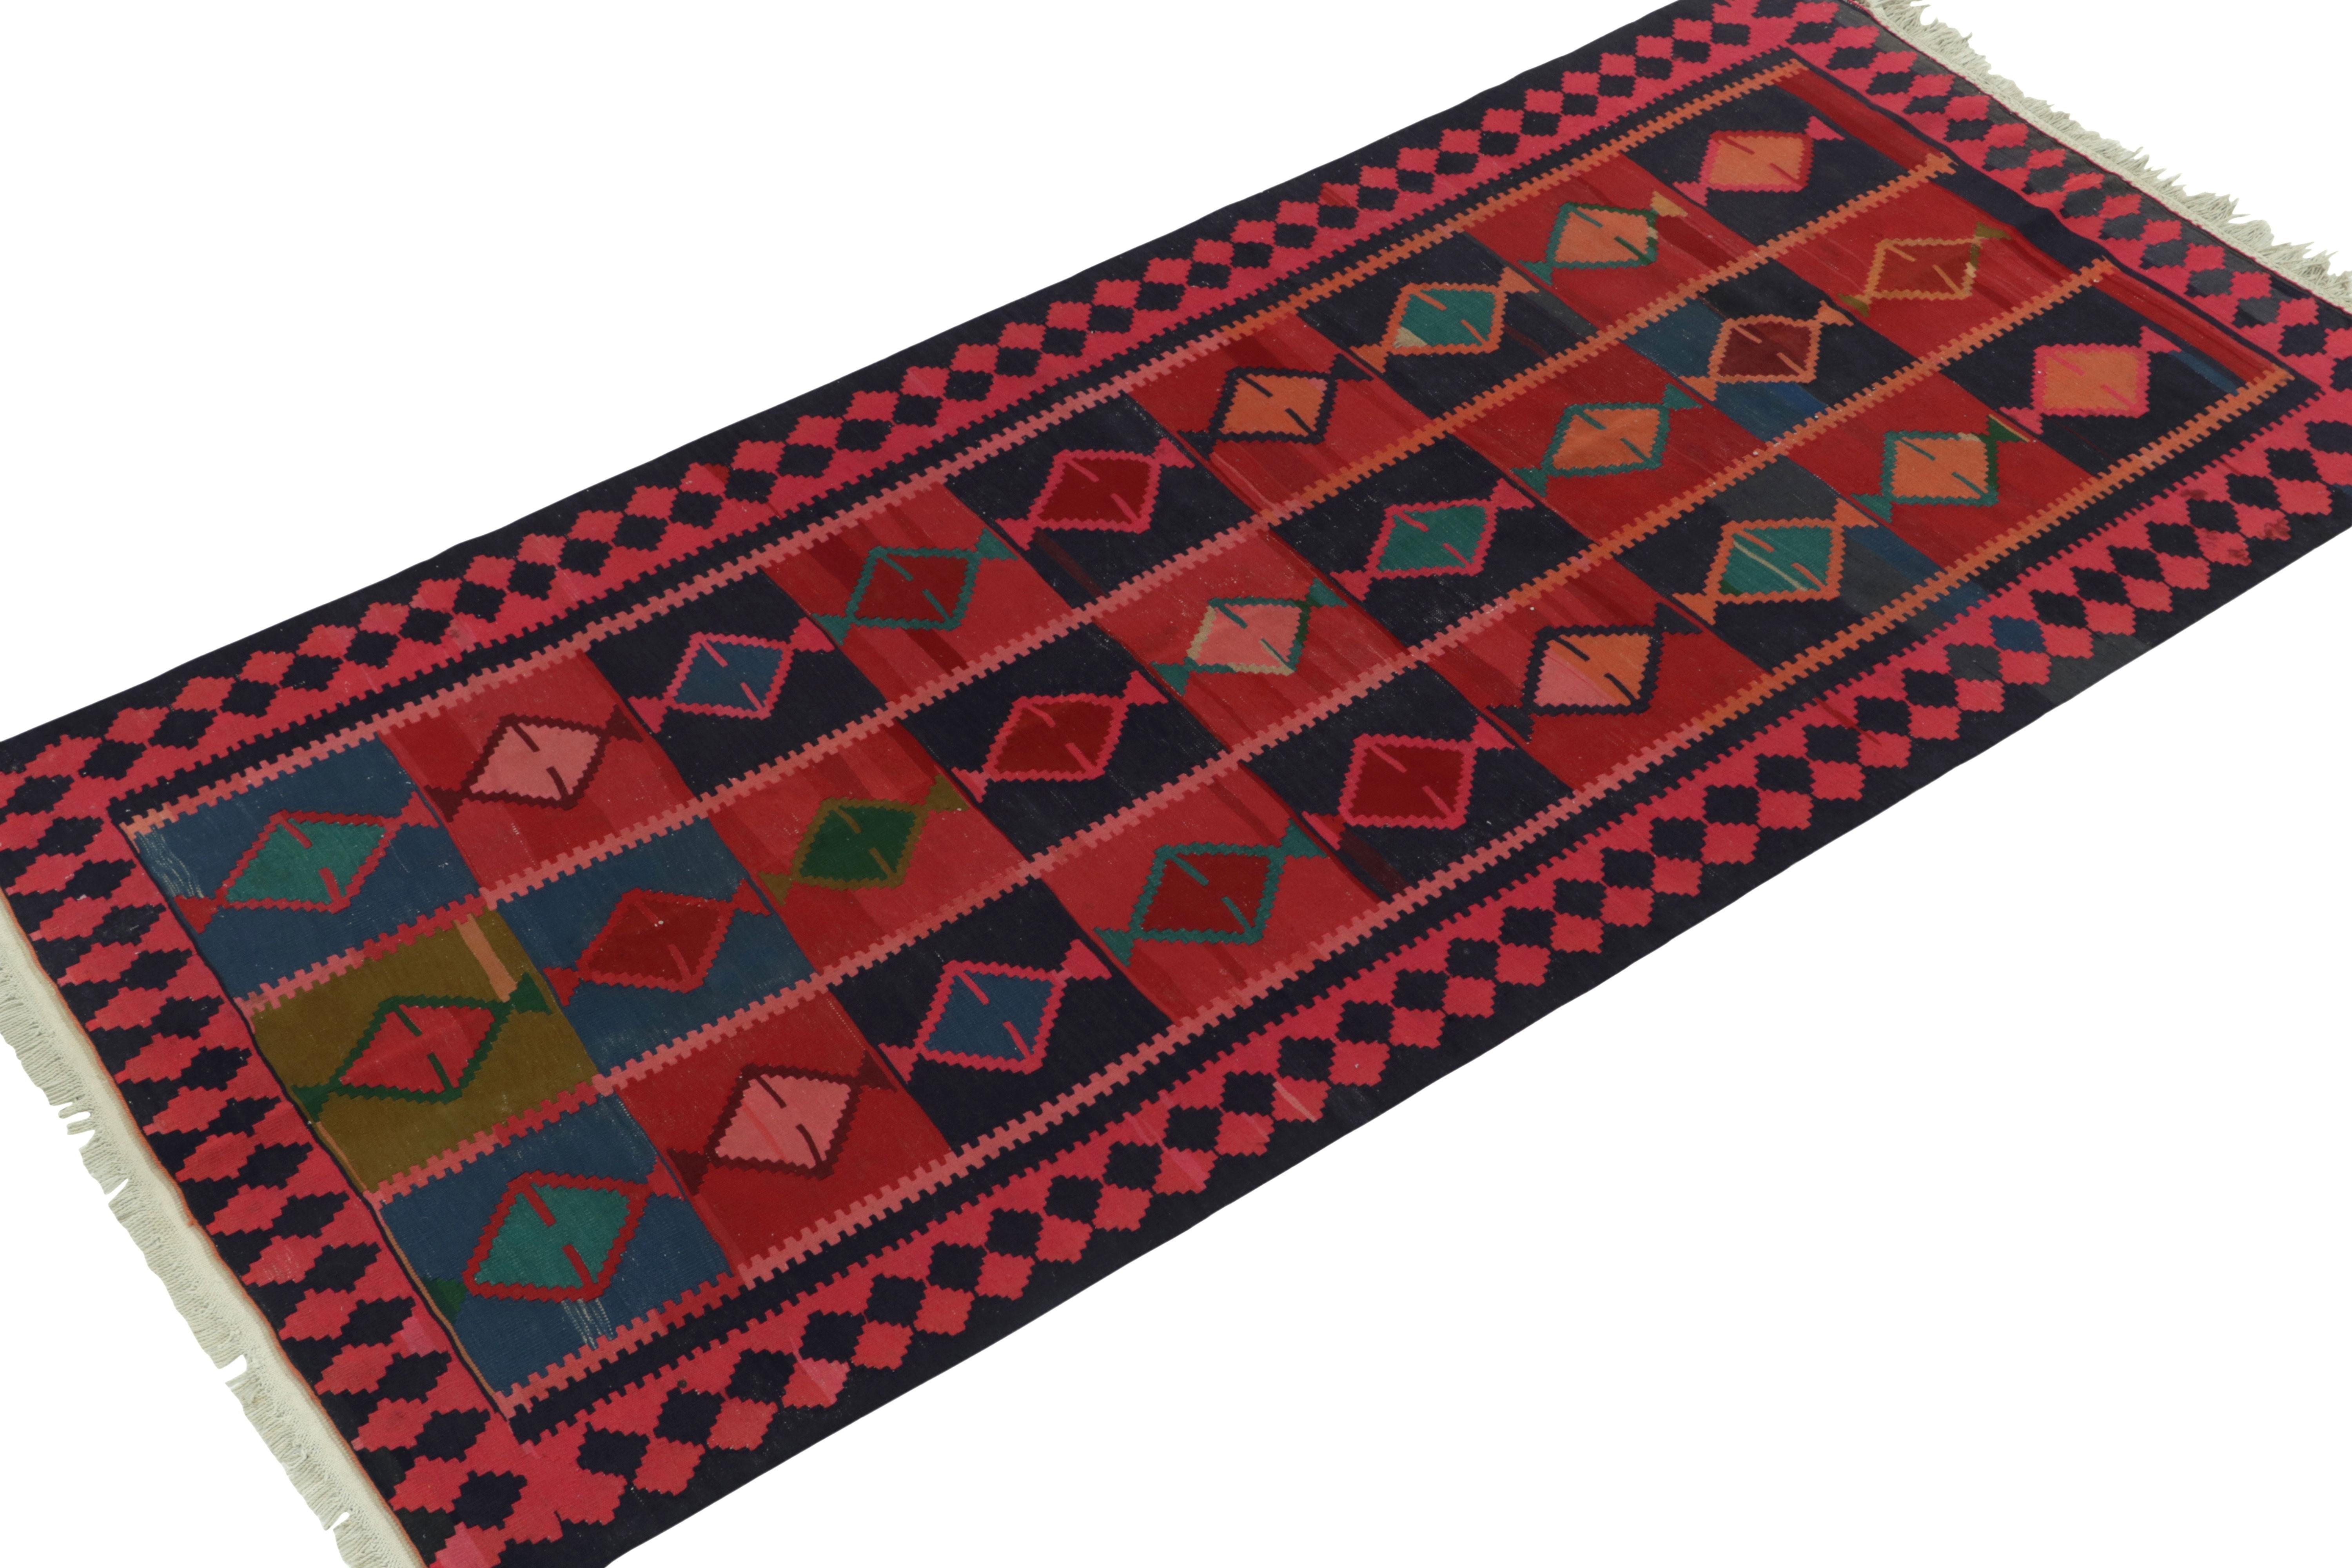 Hand-knotted in wool, an antique Persian Kilim rug originating circa 1920-1930, joining Rug & Kilim’s most coveted flat weaves. 

Celebrating fine aesthetics of a reputed tribal artisan, the 5x10 collectible features an emphasis of geometric motifs